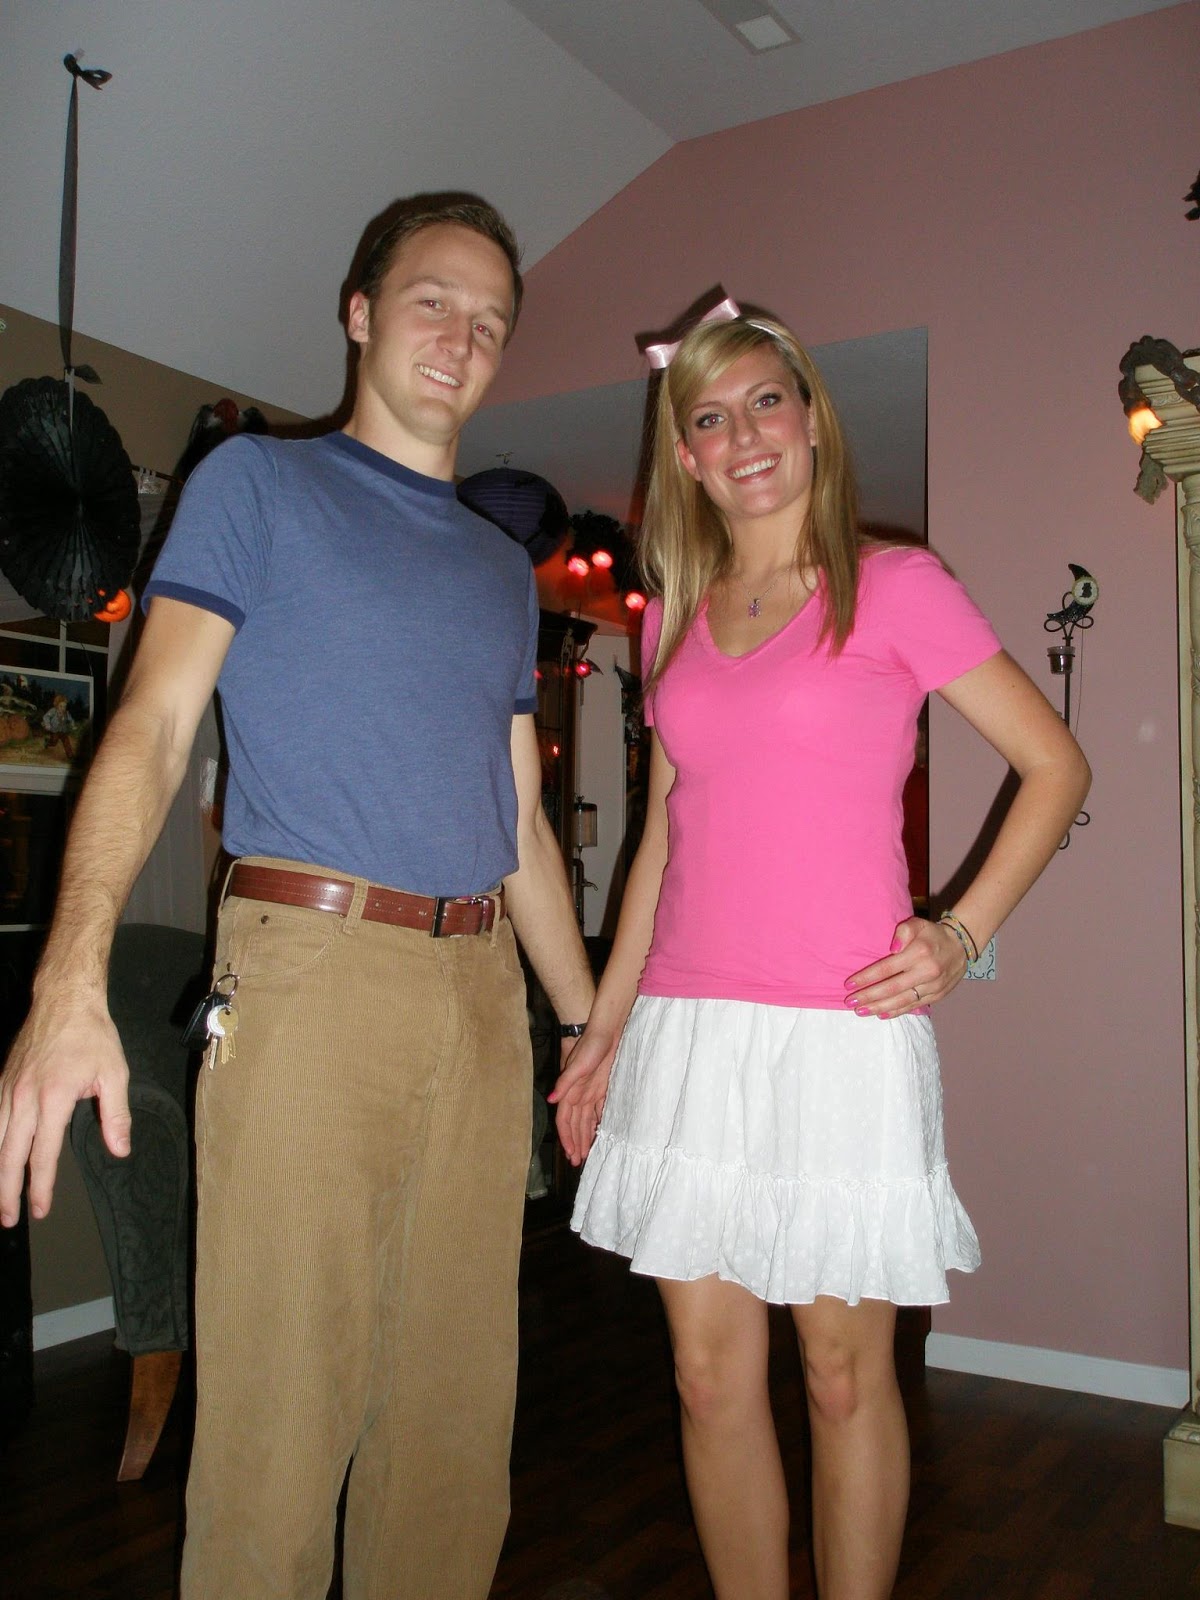 diy Costume Couples DIY Ideas couples costumes Halloween funny